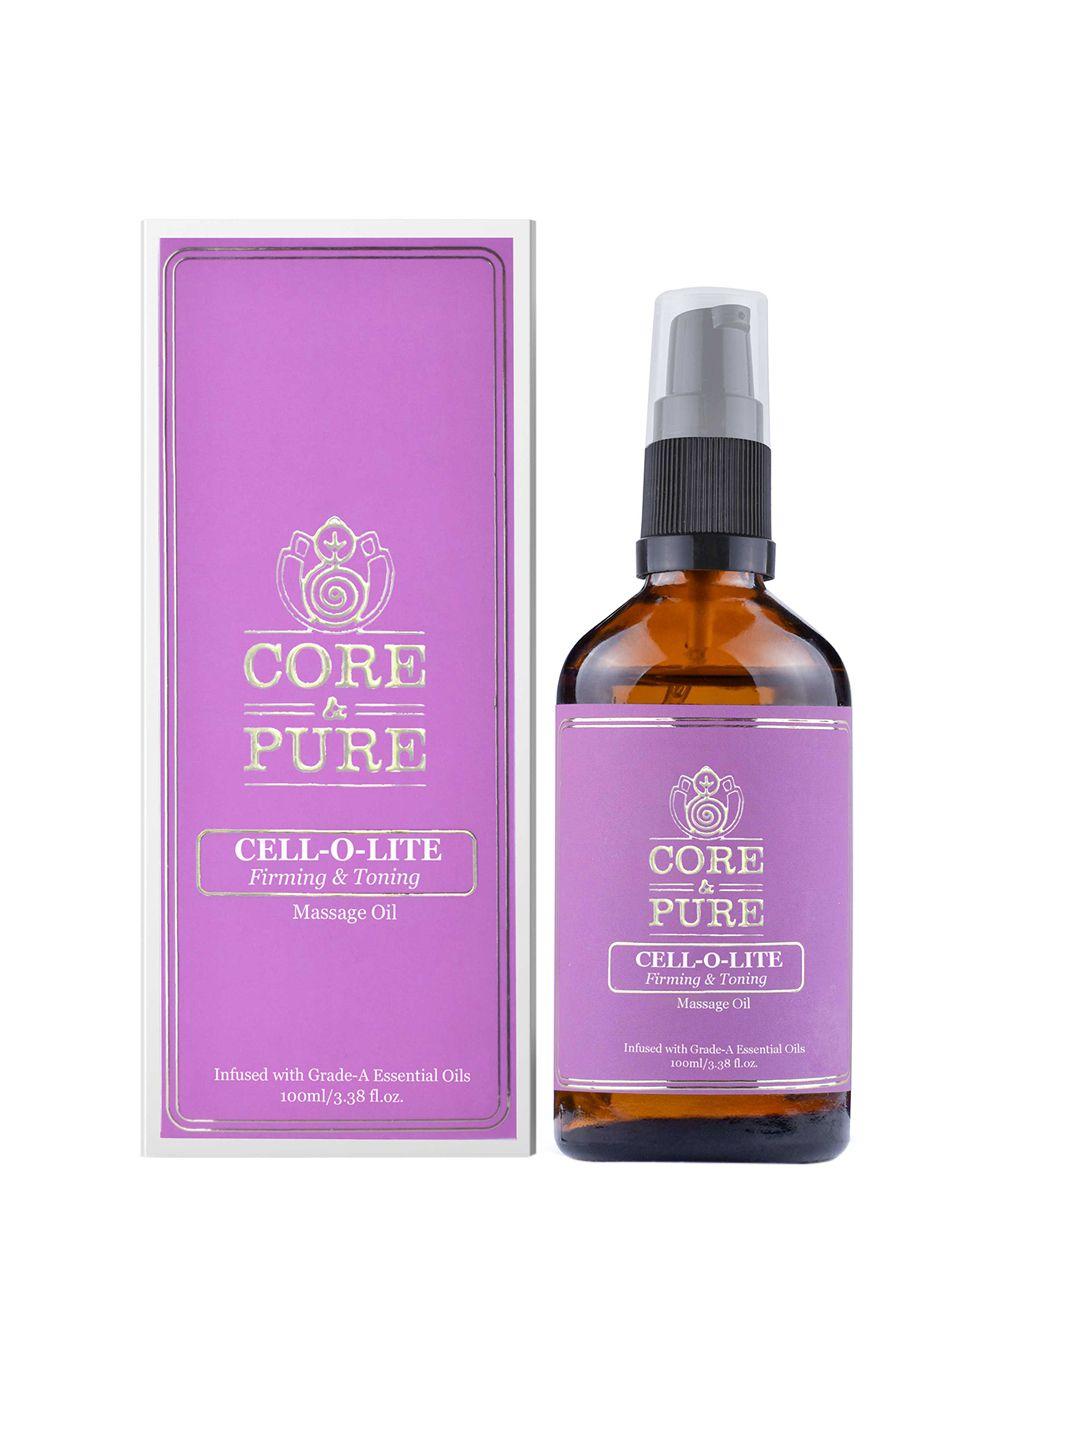 core & pure cell-o-lite essential massage oil for firming and toning